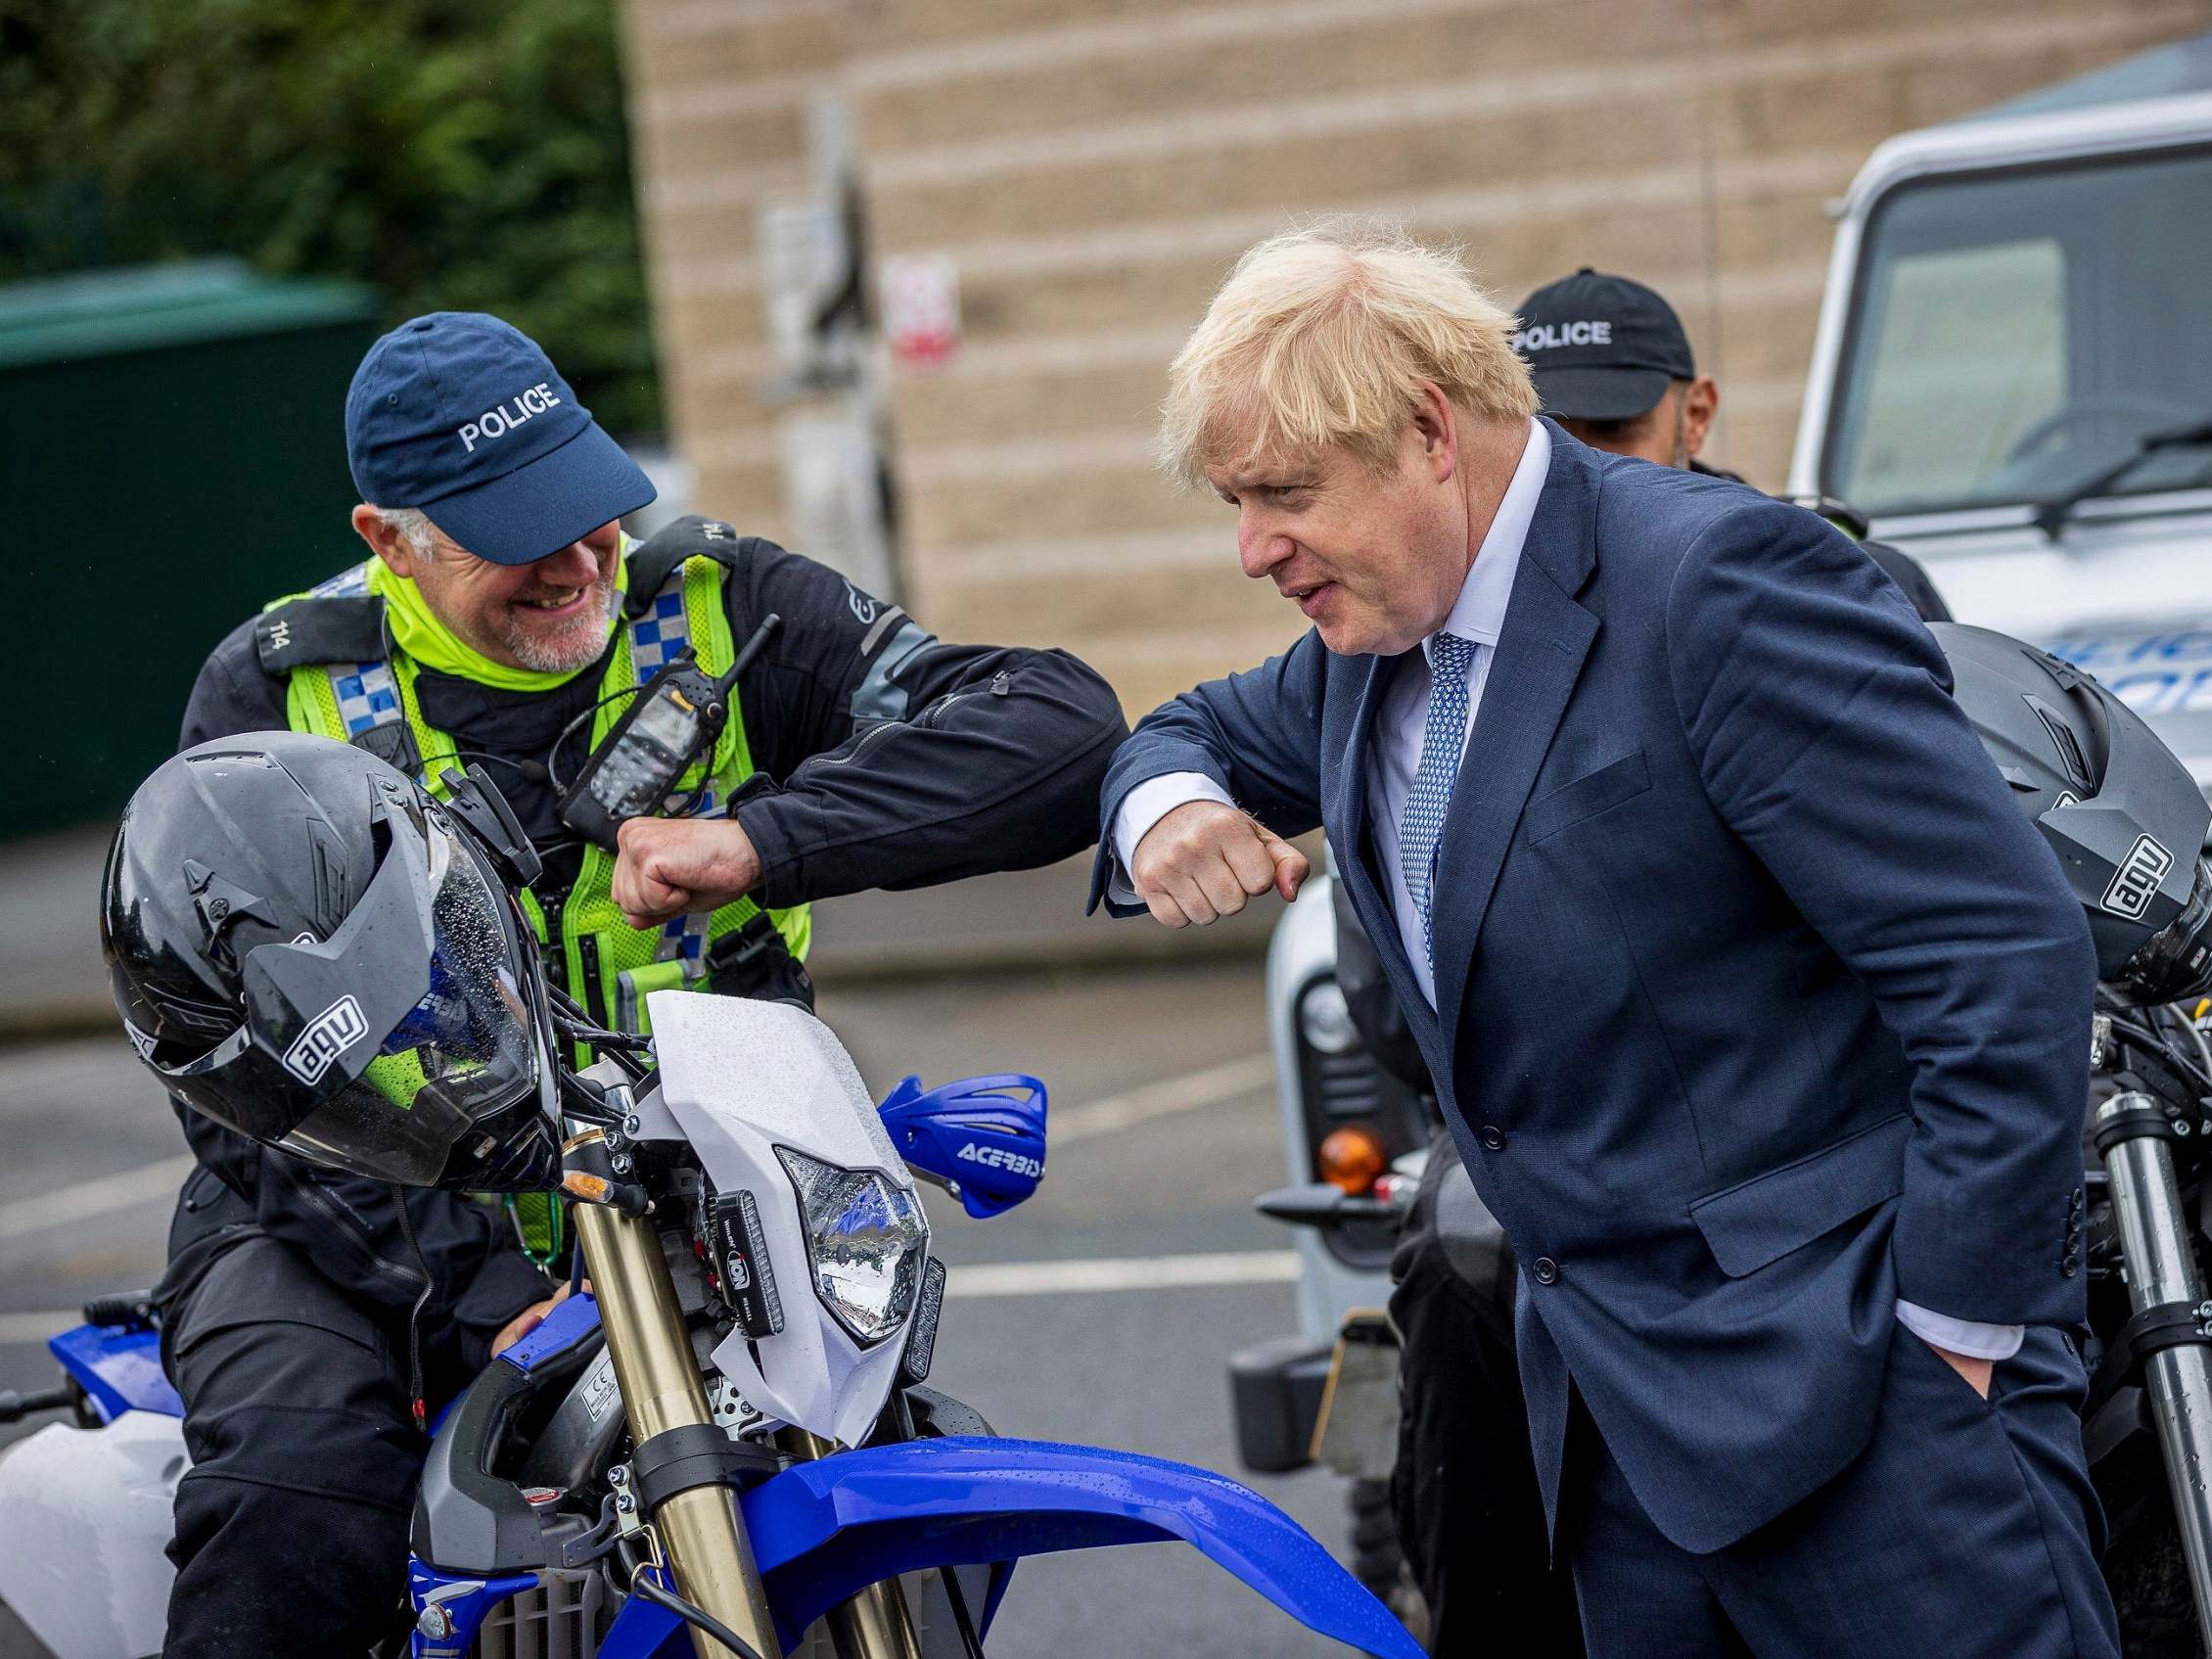 Britain's Prime Minister Boris Johnson meets with police officers during a visit to North Yorkshire Police headquarters, Northallerton